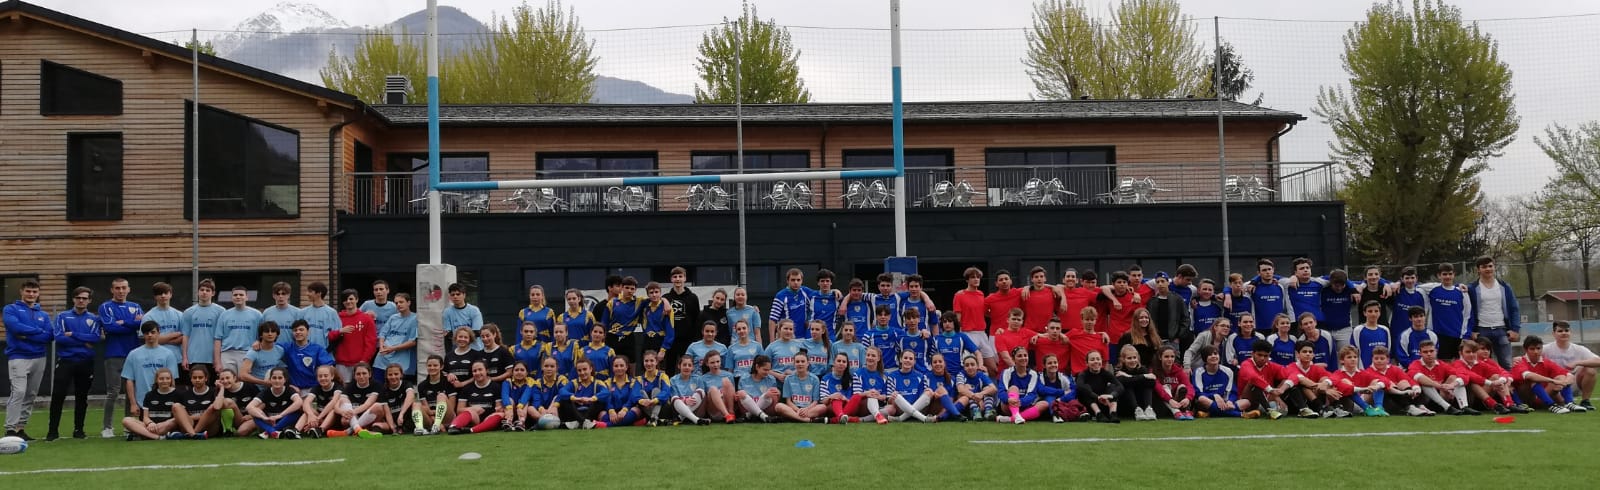 Rugby, le categorie allieve e allievi